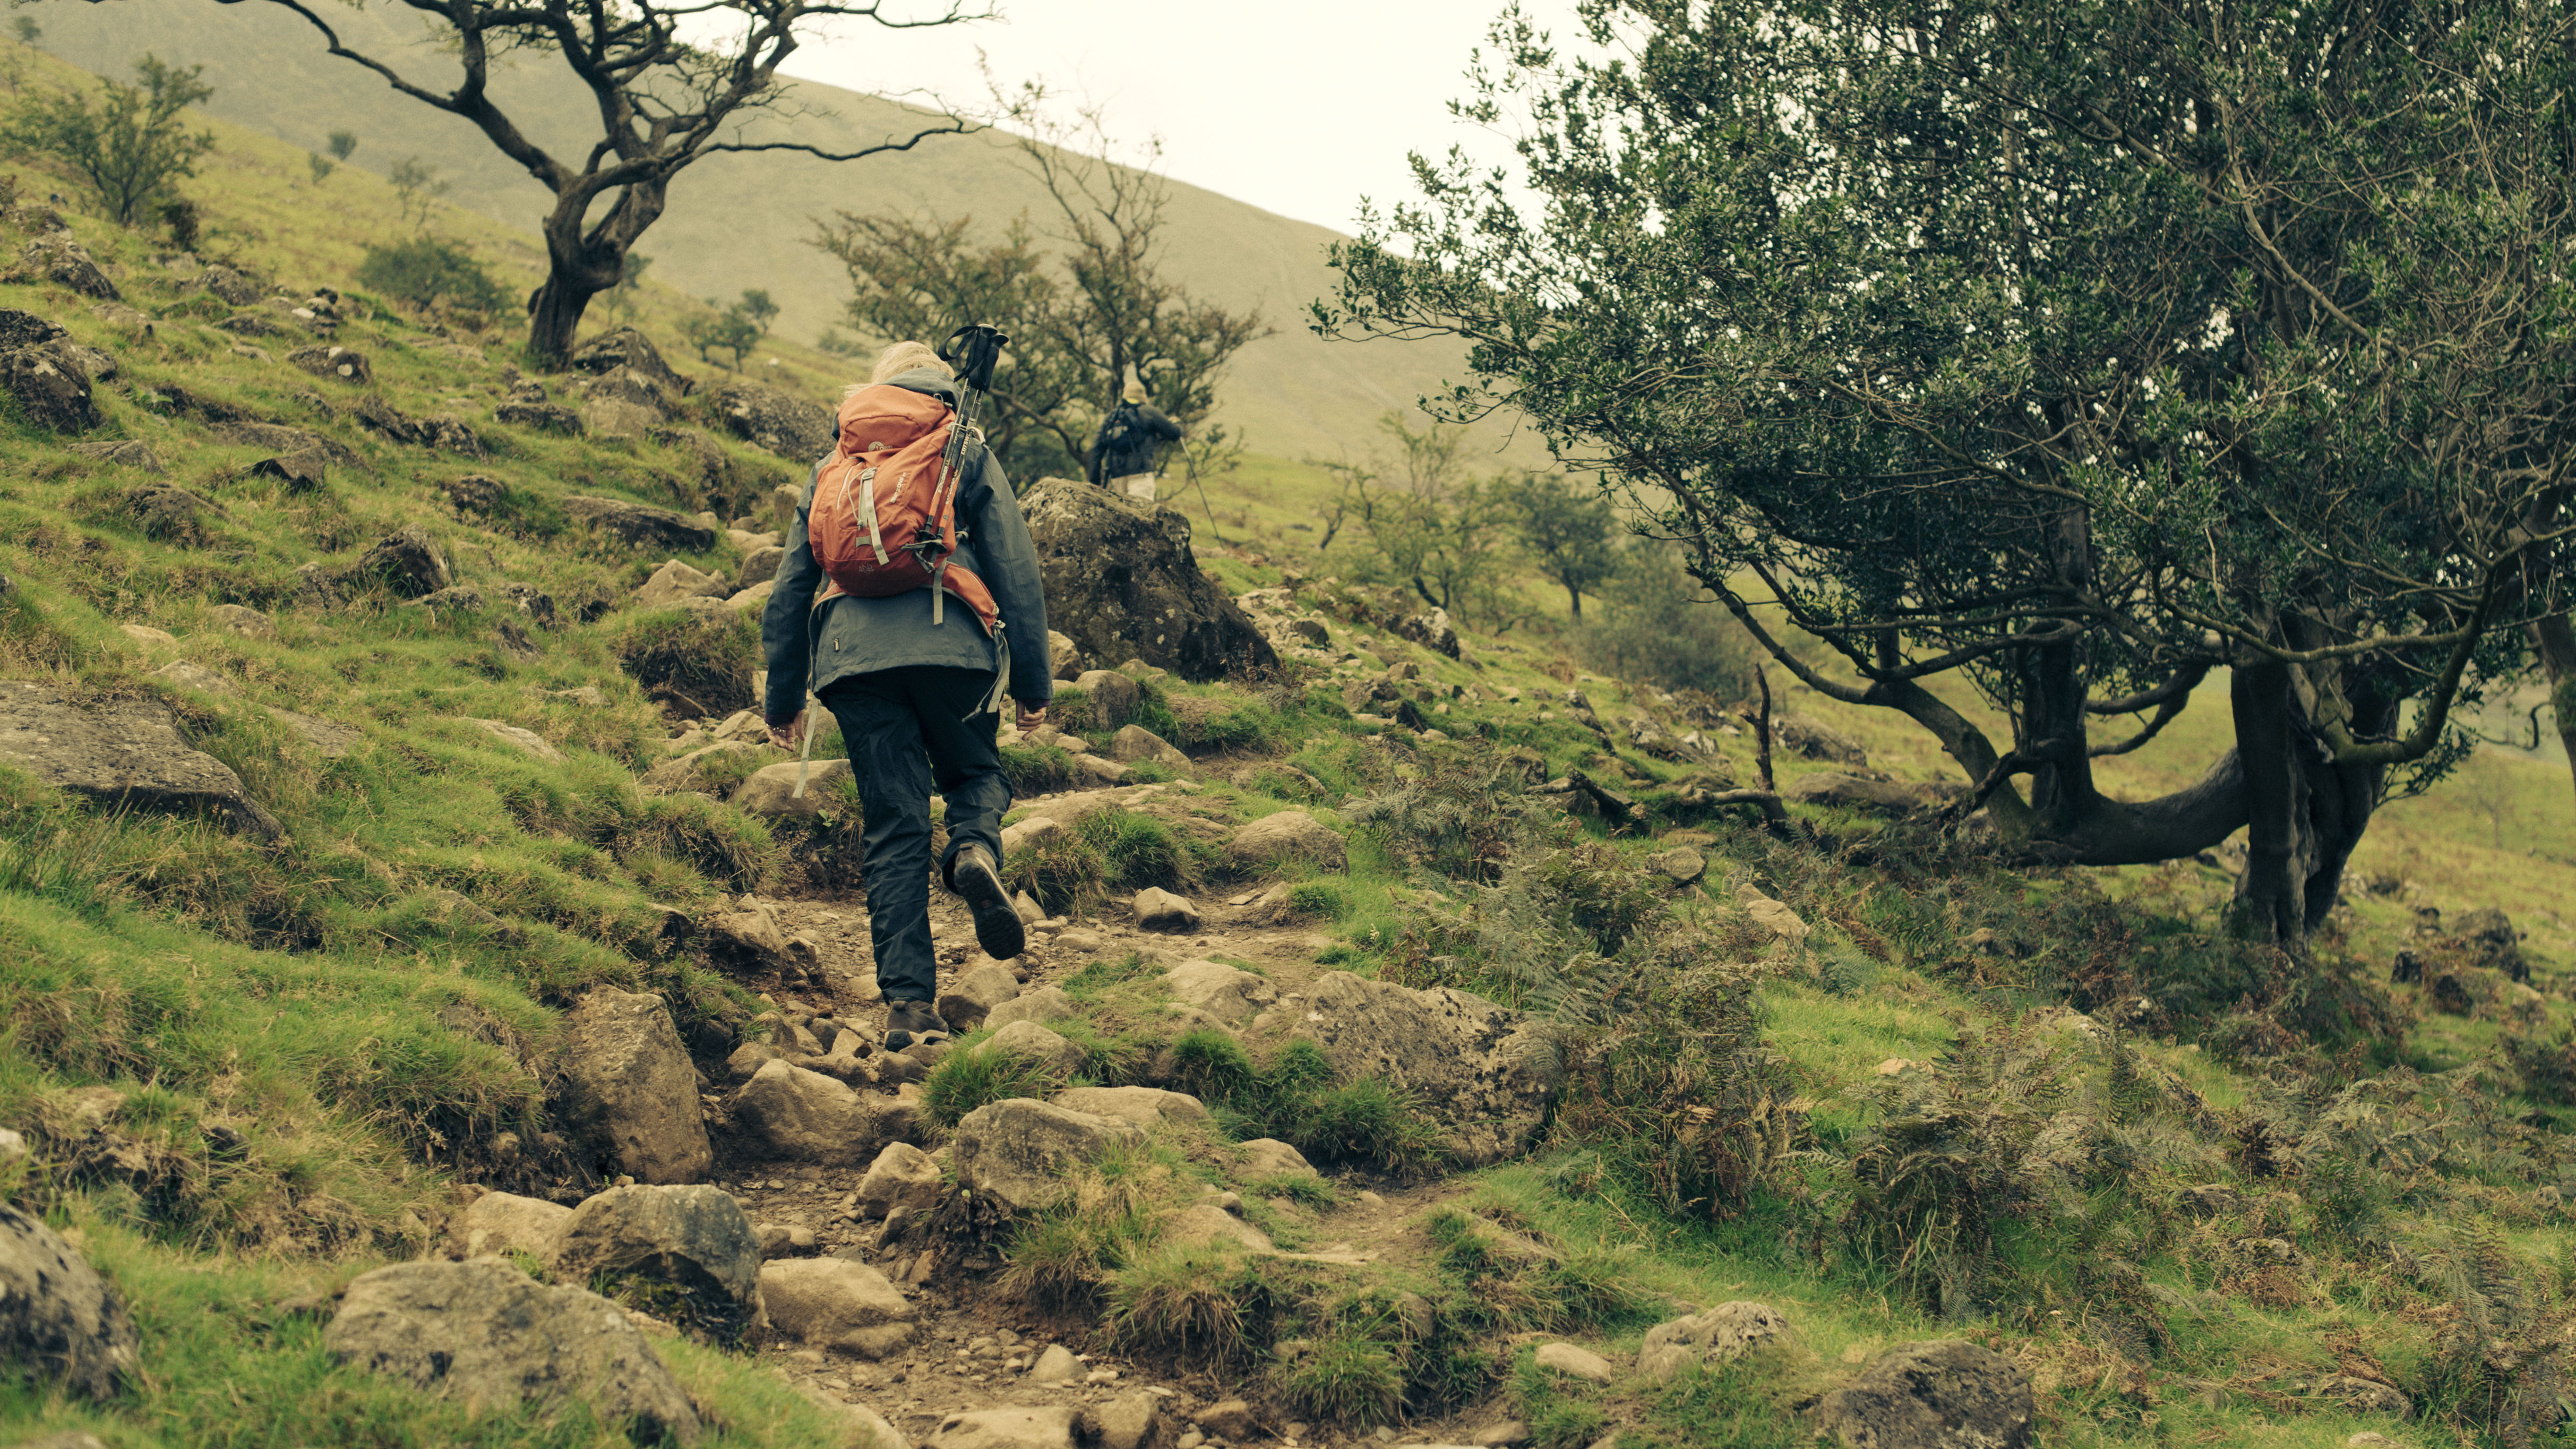 The image shows a person walking over rough terrain